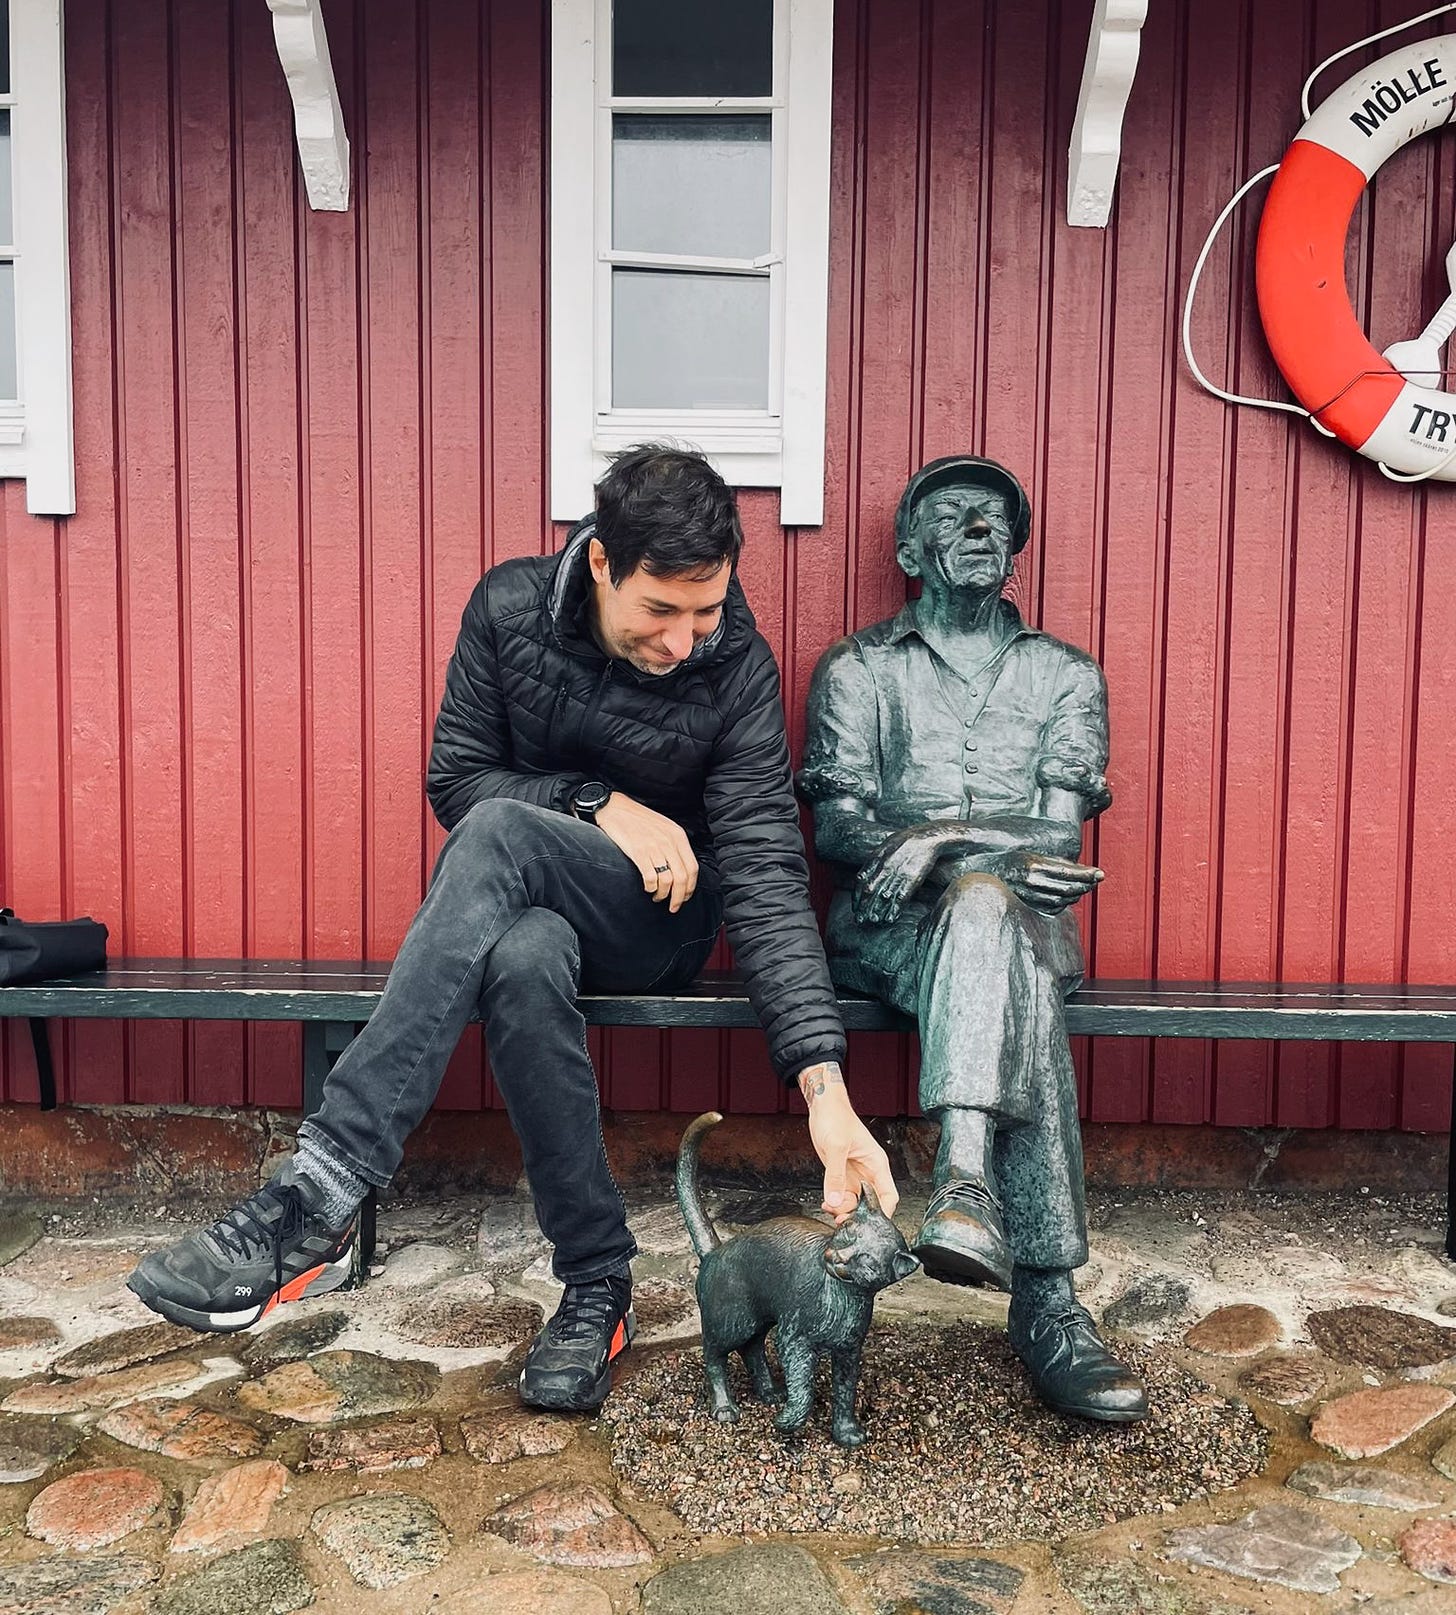 The author sitting on a bench with a statue of a sleeping man and a cat